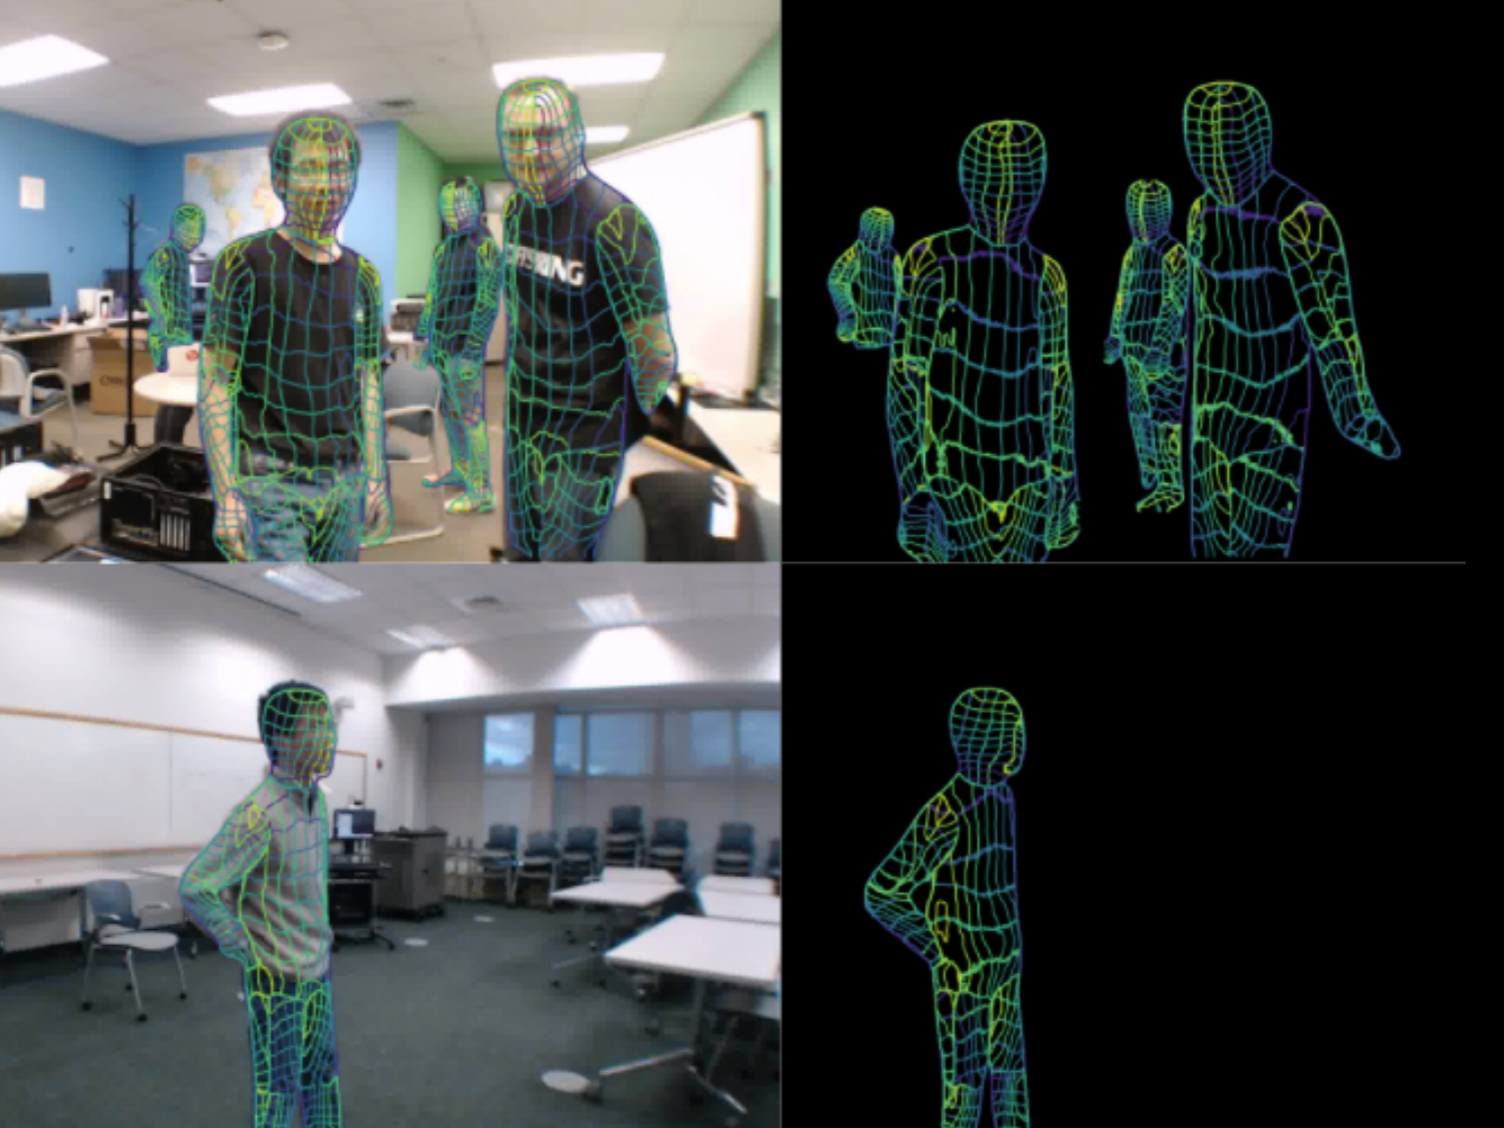 Carnegie Mellon University researchers built AI that can detect and map human bodies through walls using WiFi signals